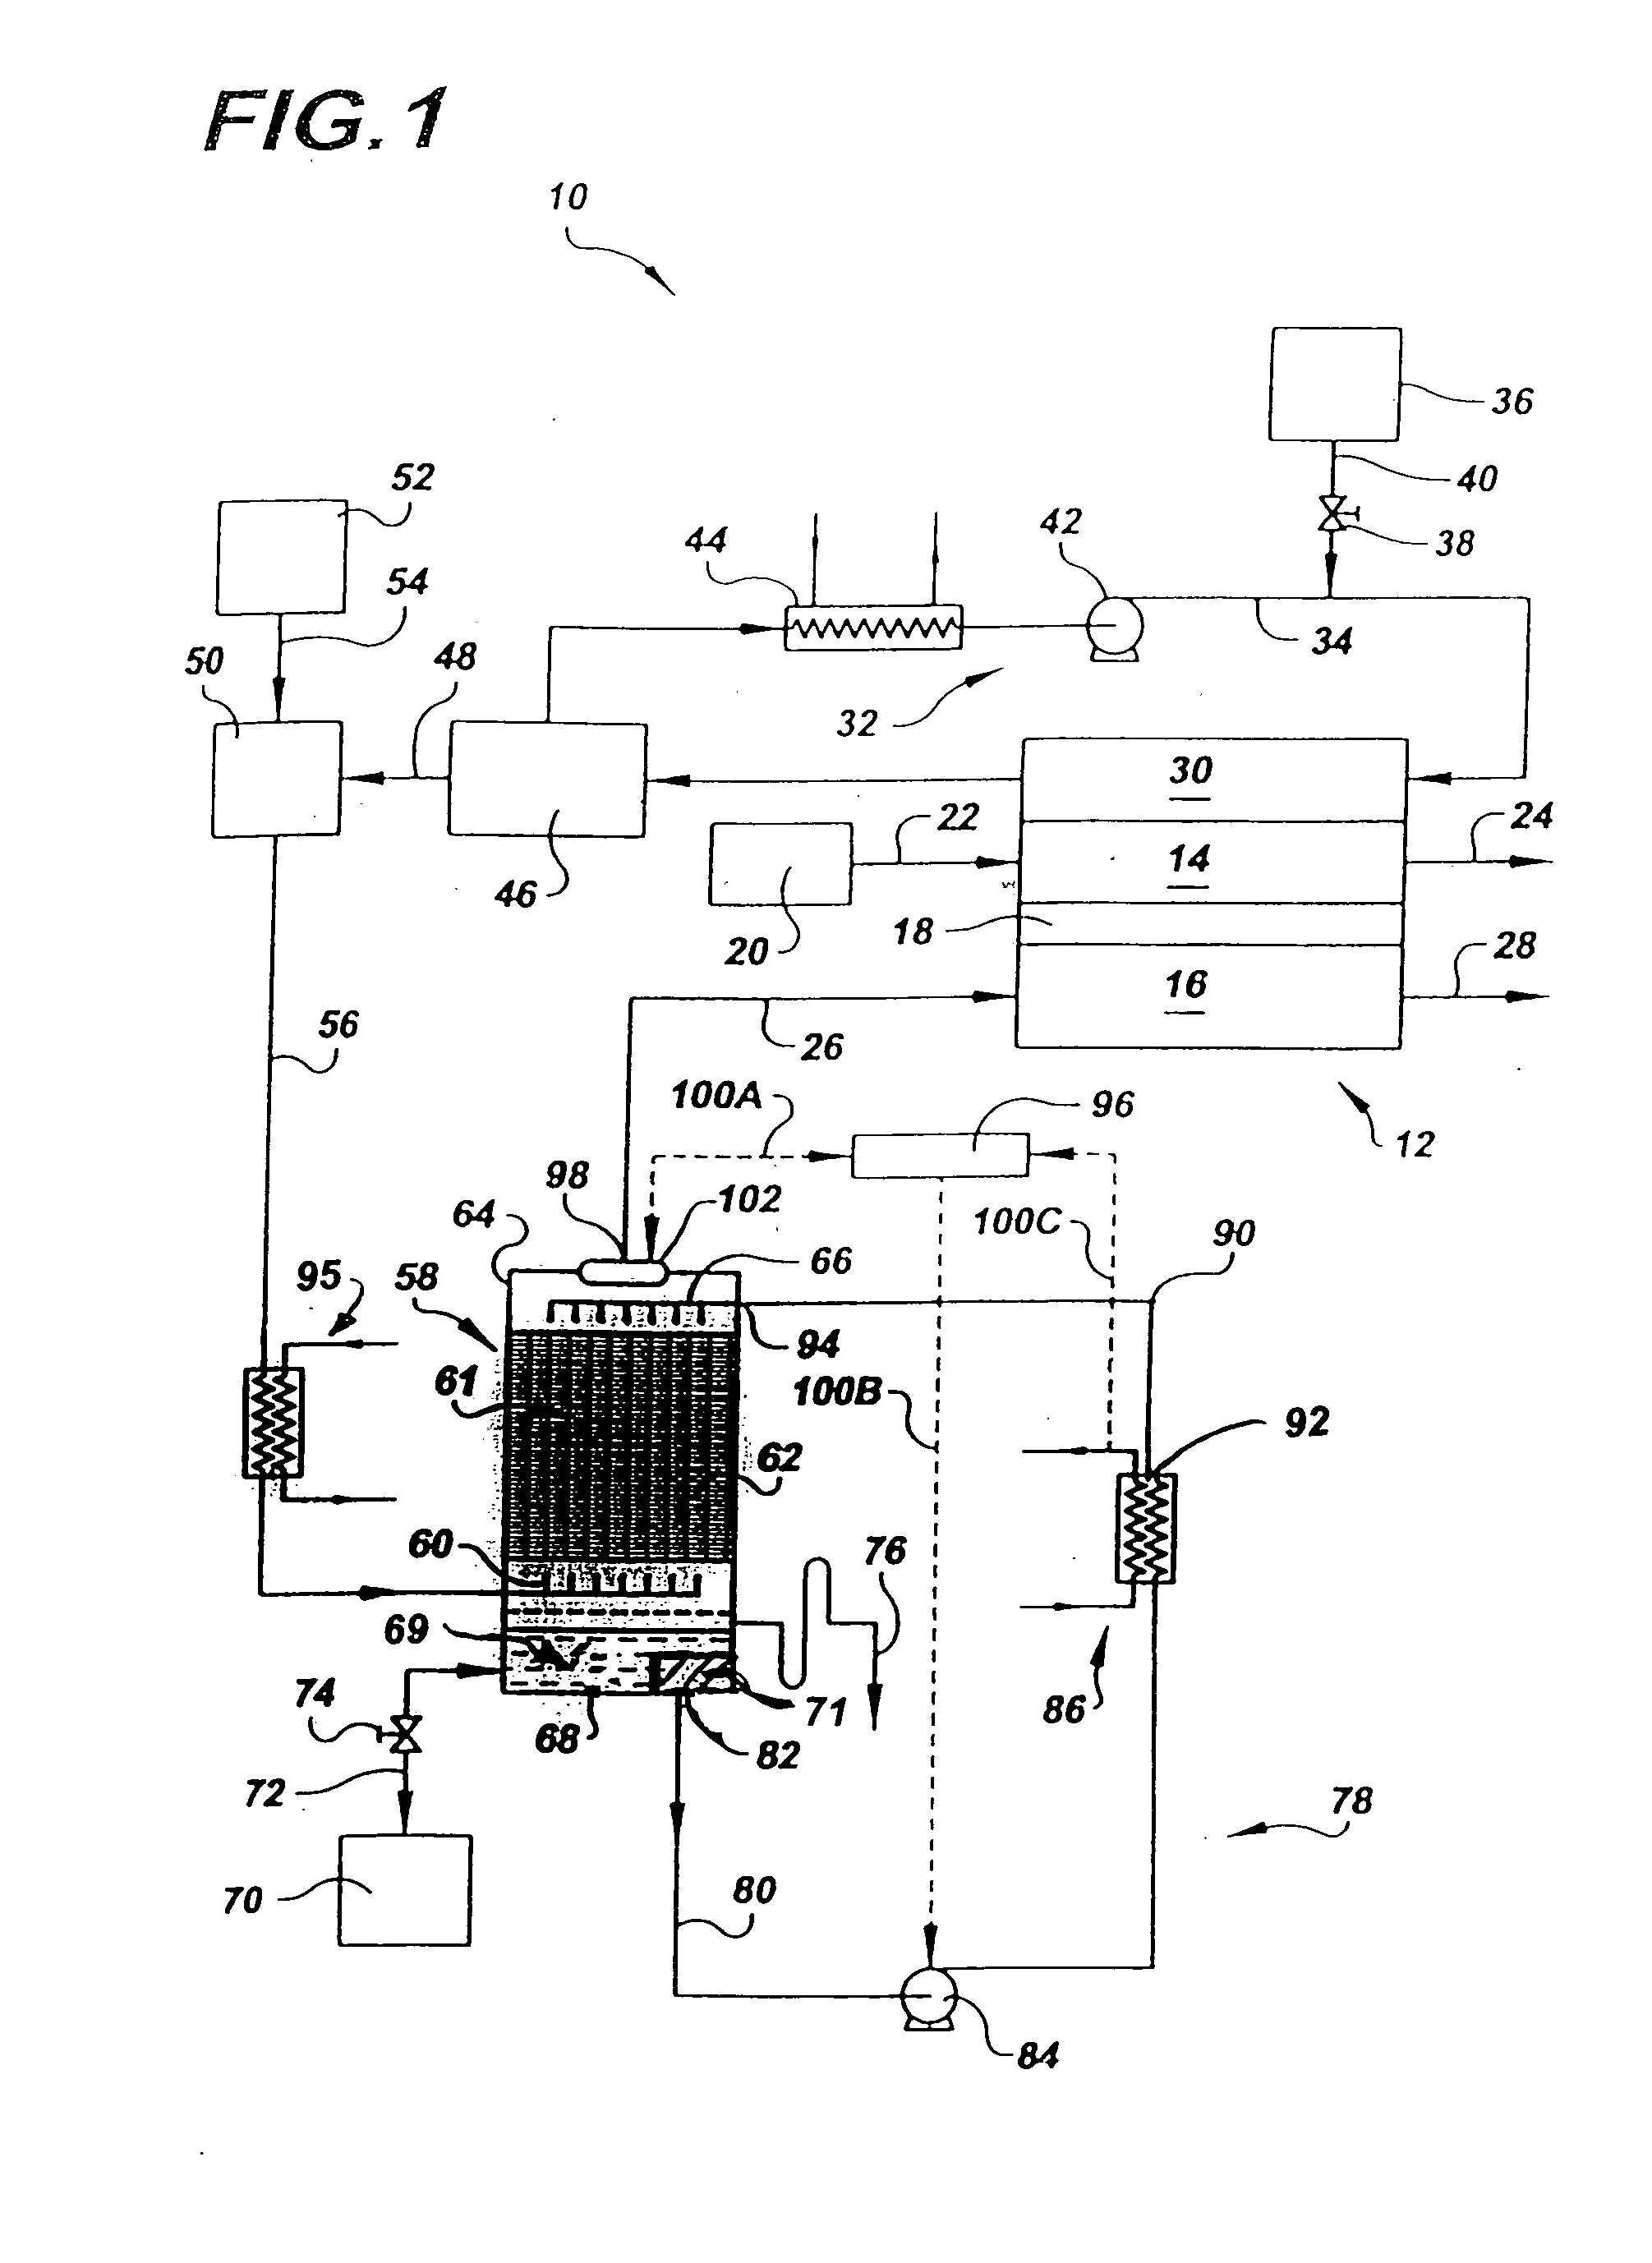 Integrated contaminant6 separator and water-control loop for a fuel reactant stream